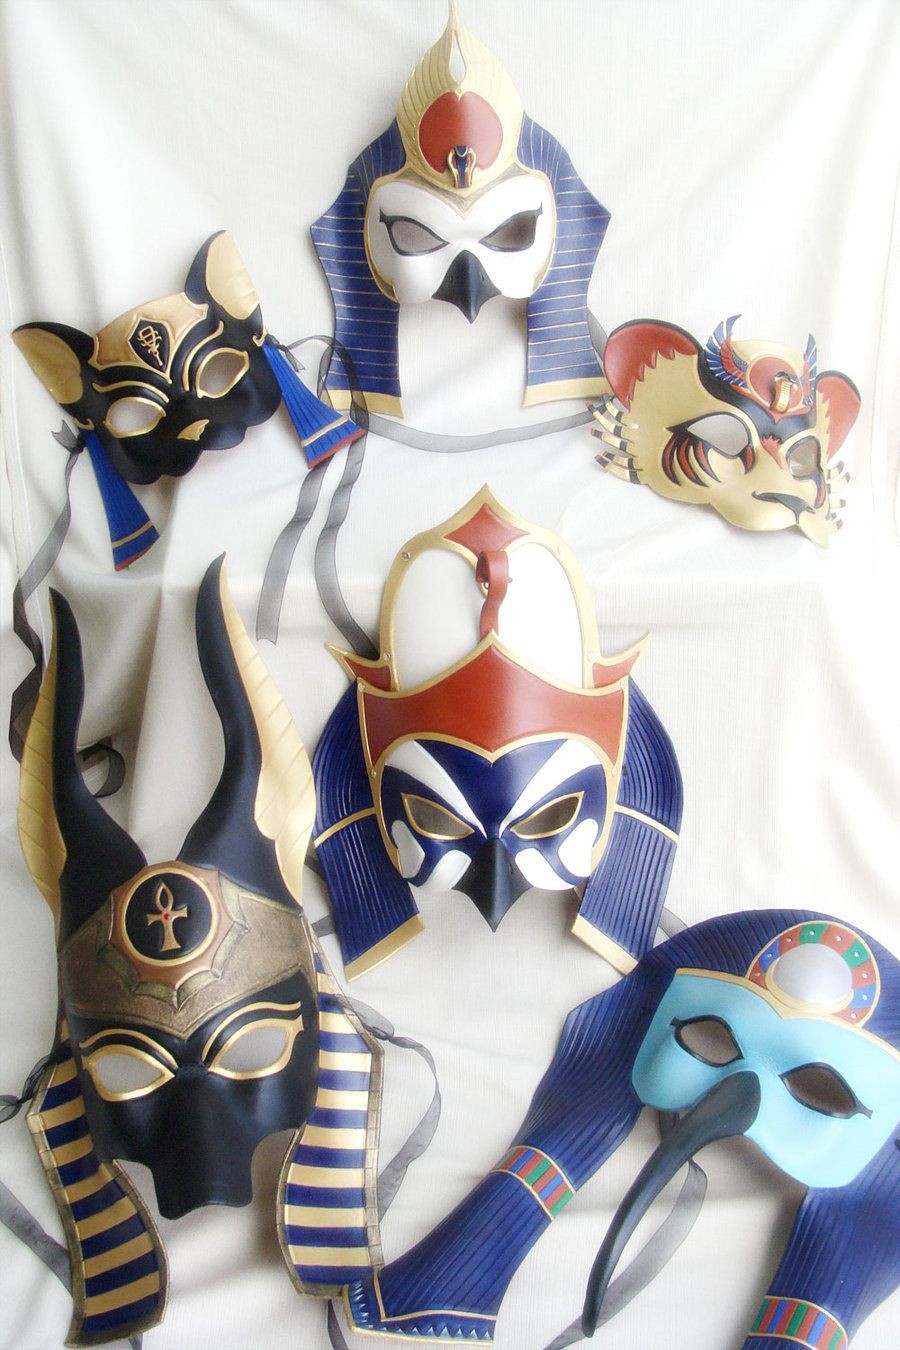 Splicer Mask Papercraft A Family Portrait Of All the Egyptian Masks I Ve Made so Far